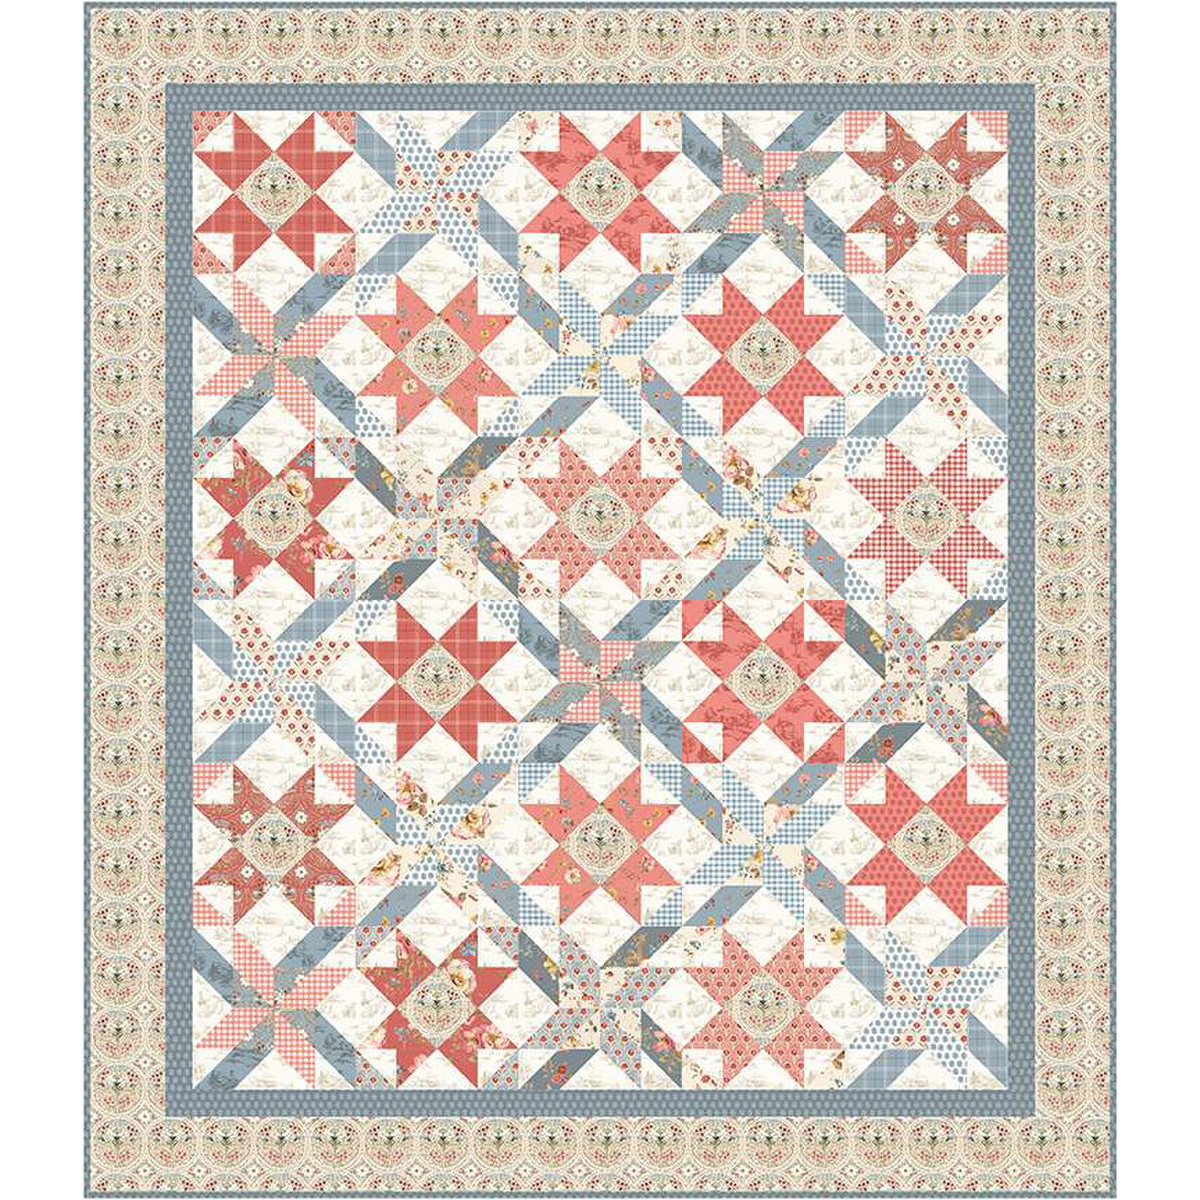 Countryside Shine On Quilt Kit-Riley Blake Fabrics-My Favorite Quilt Store